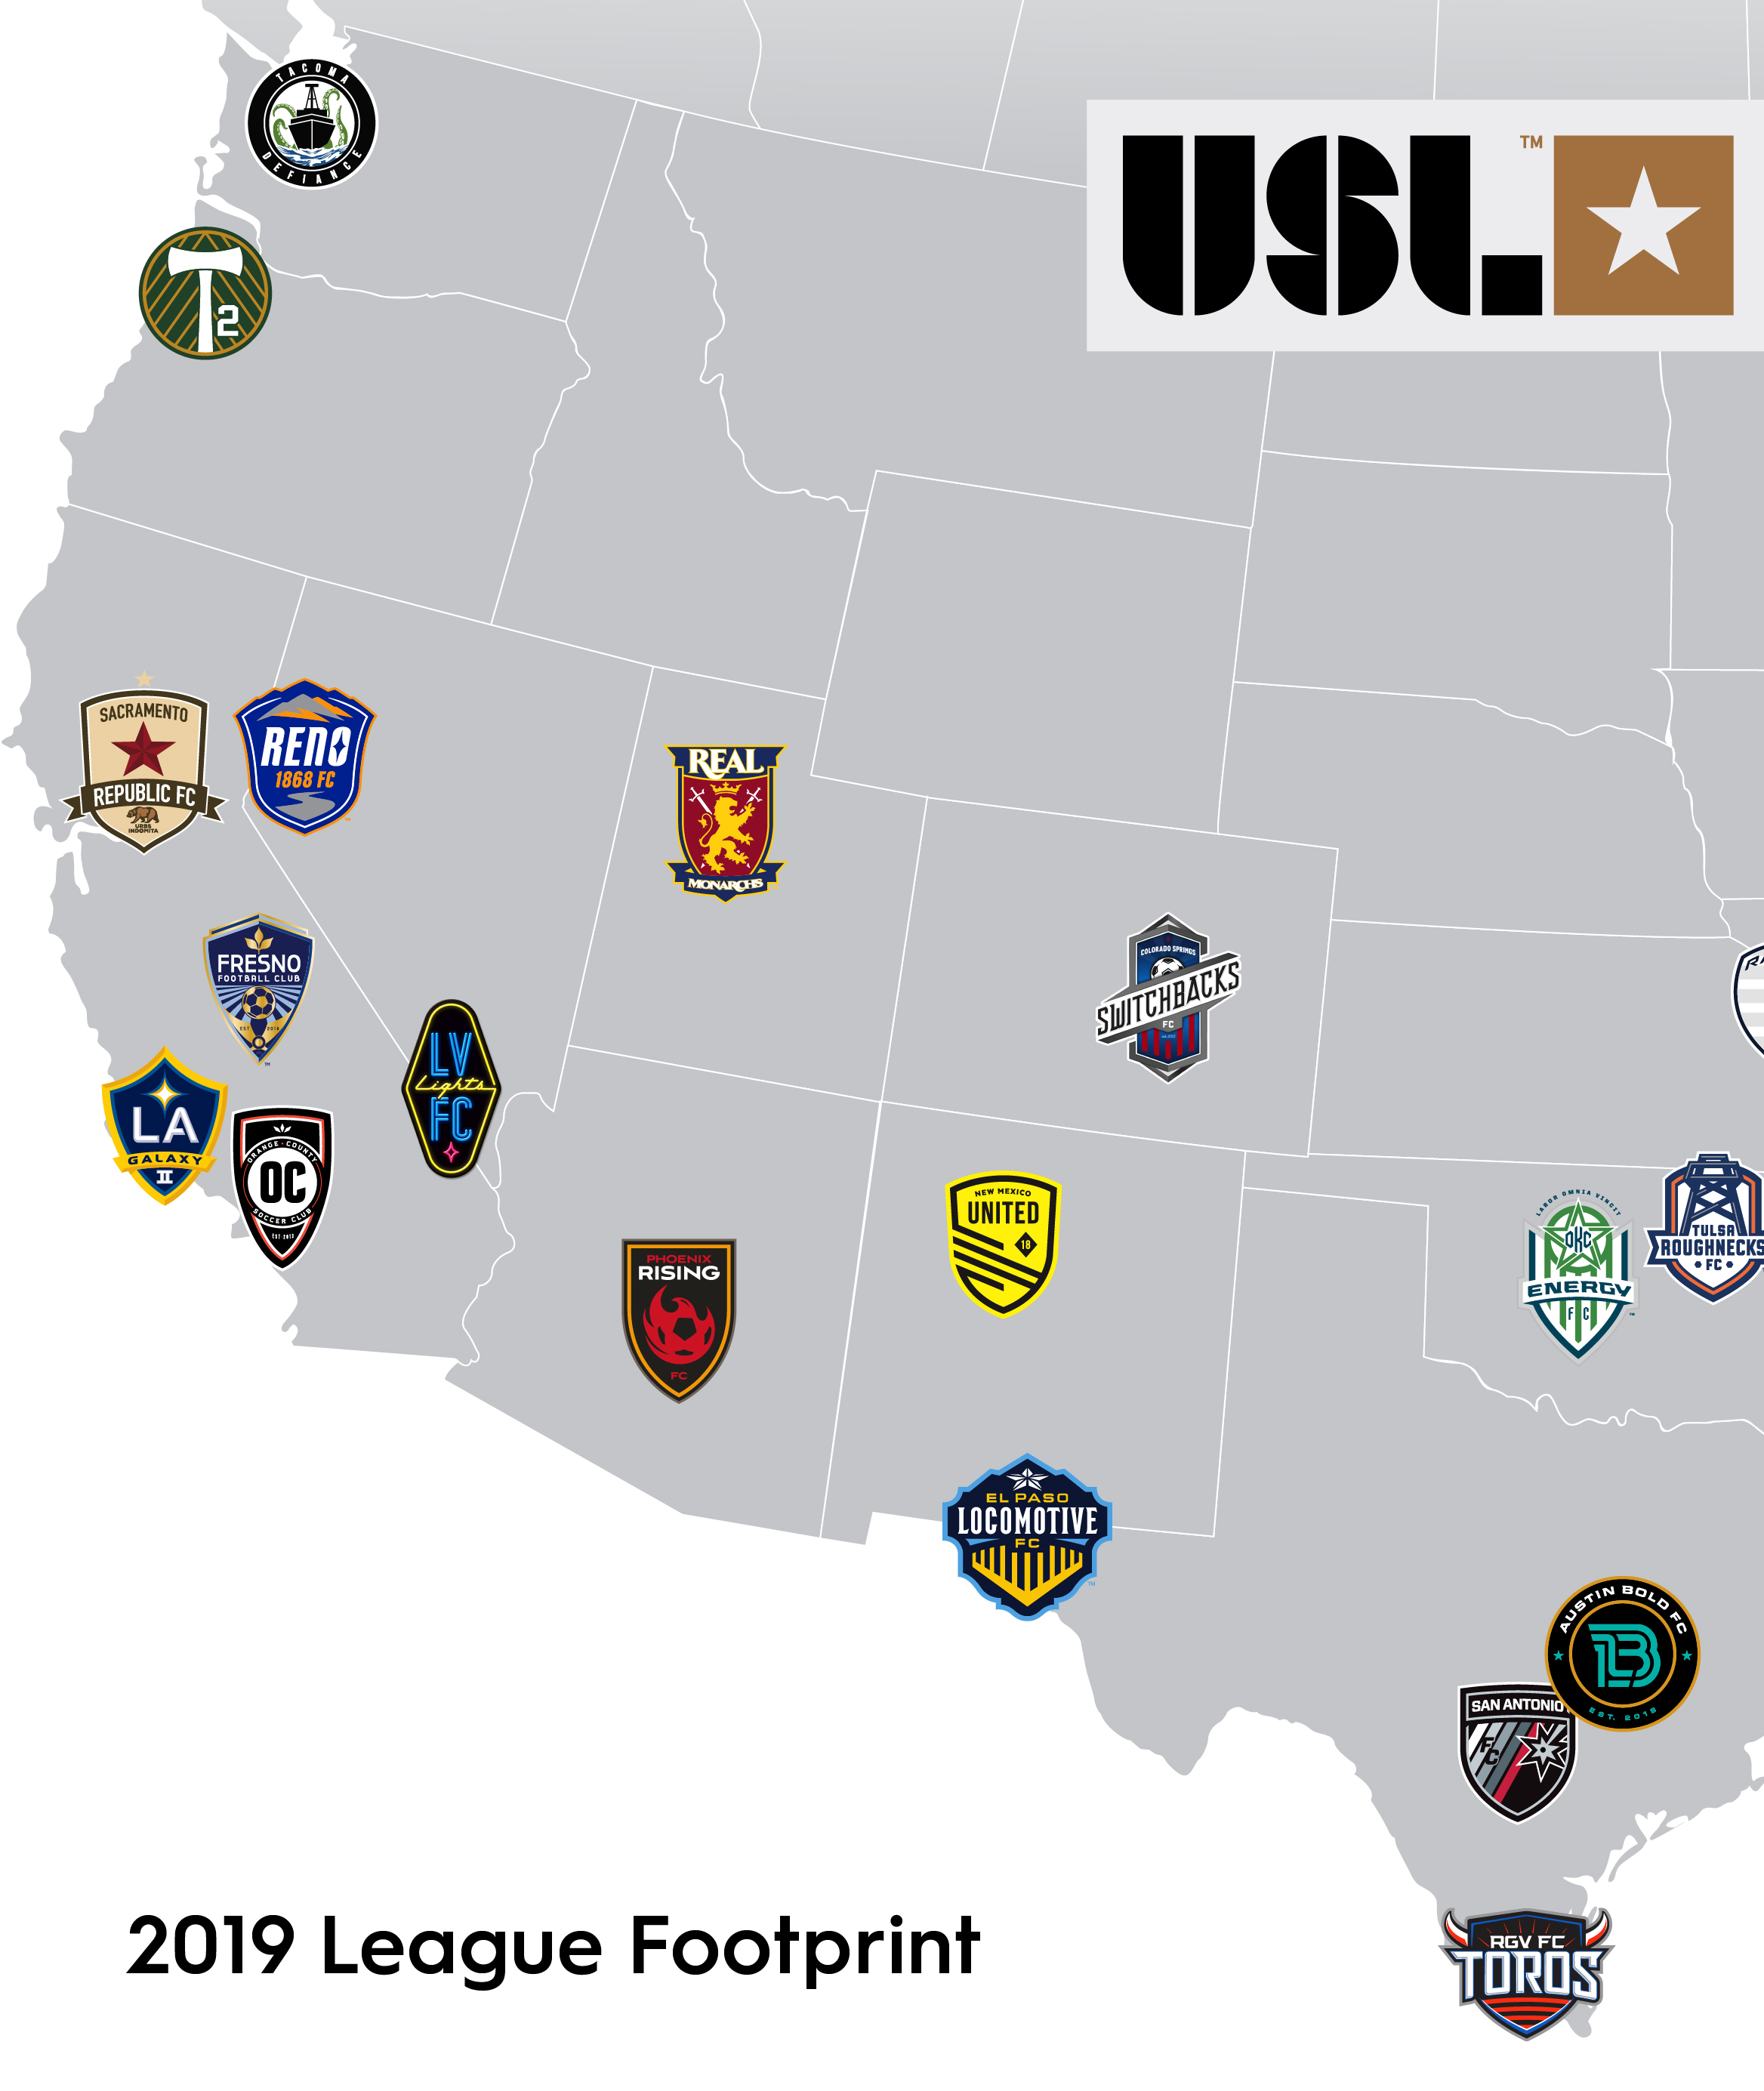 USL Championship – Western Conference Preview